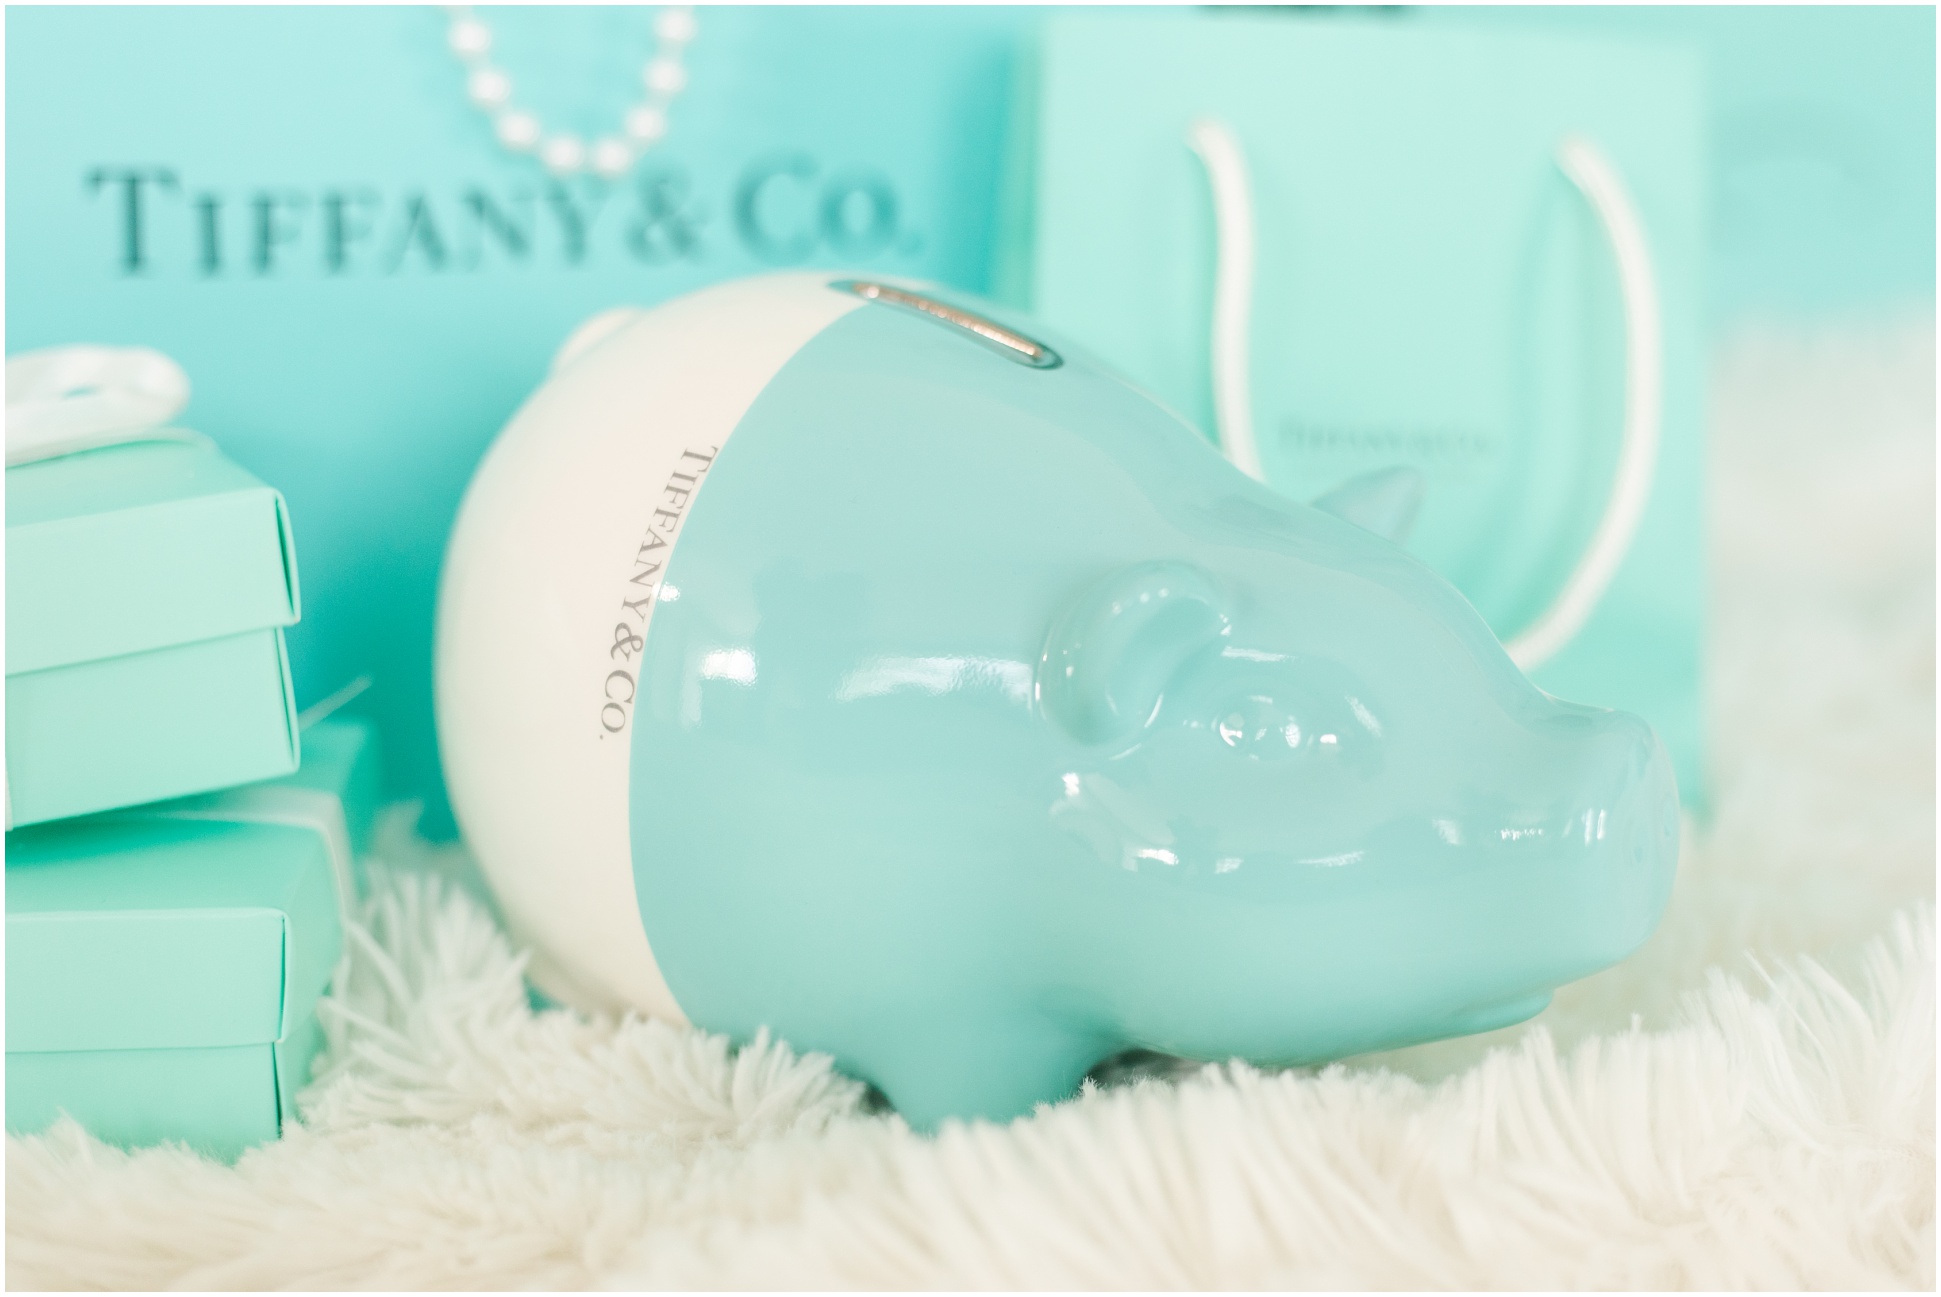 Tiffany & Co piggy bank surrounded by Tiffany & Co bags